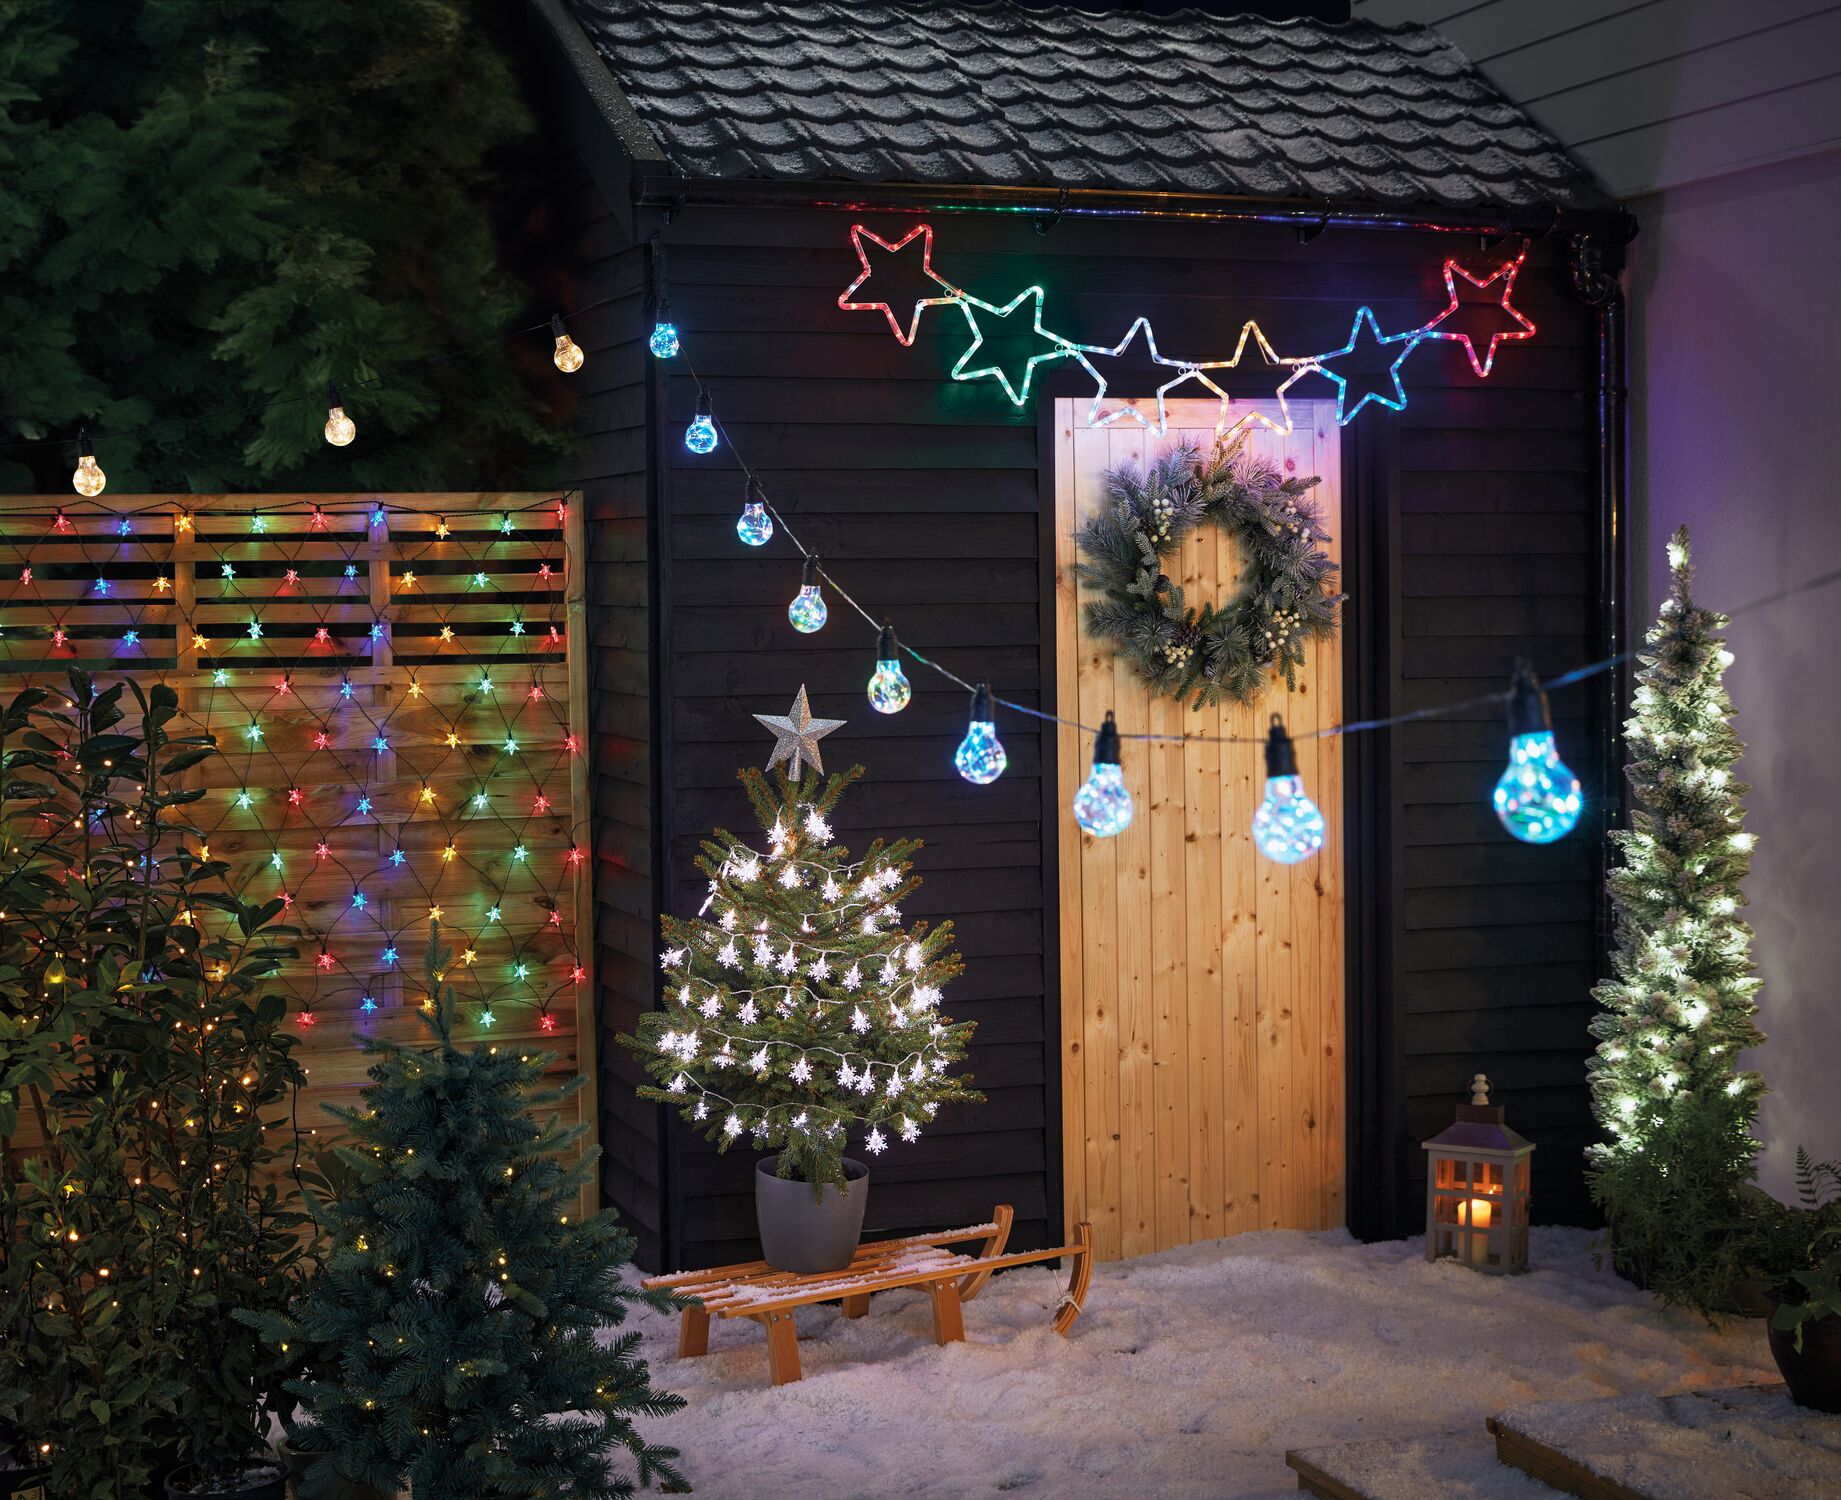 A mixture of outdoor Christmas lights including tree lights and netted lights